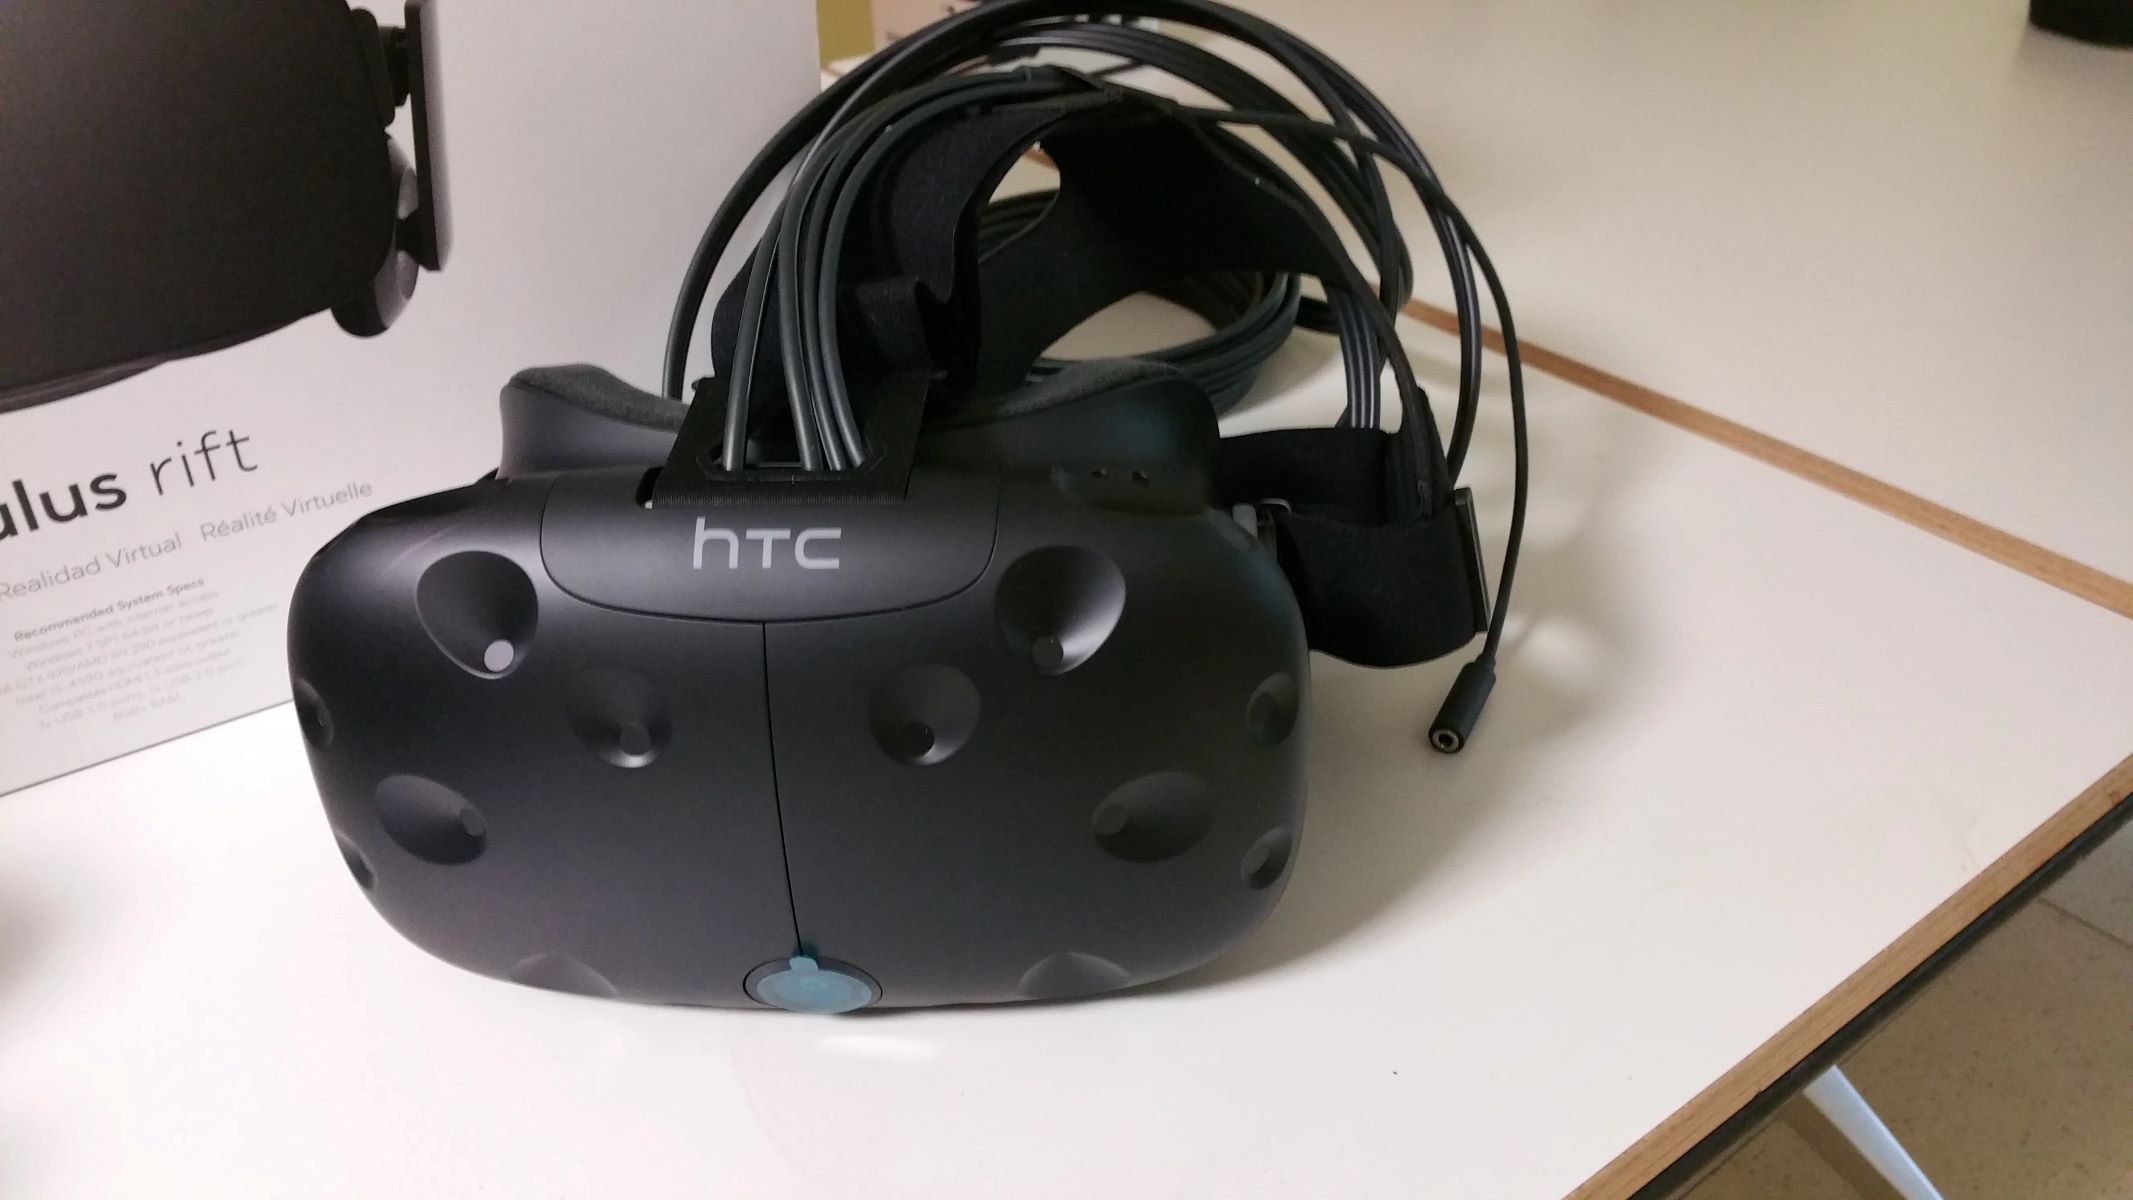 is-there-a-way-to-capture-what-htc-vive-sees